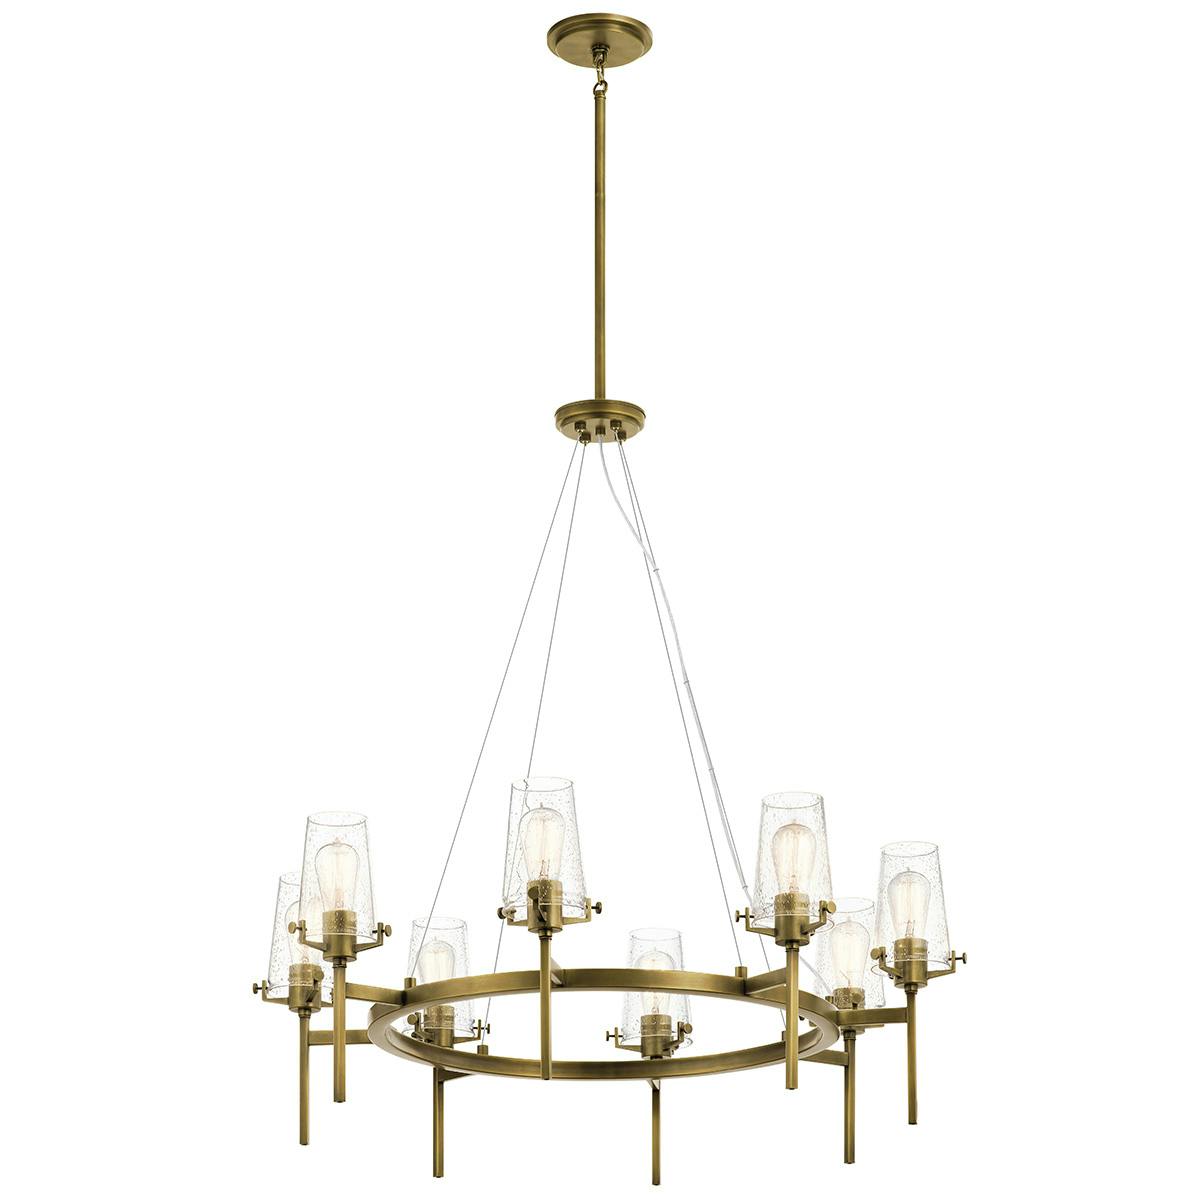 Alton 38" Chandelier Natural Brass on a white background